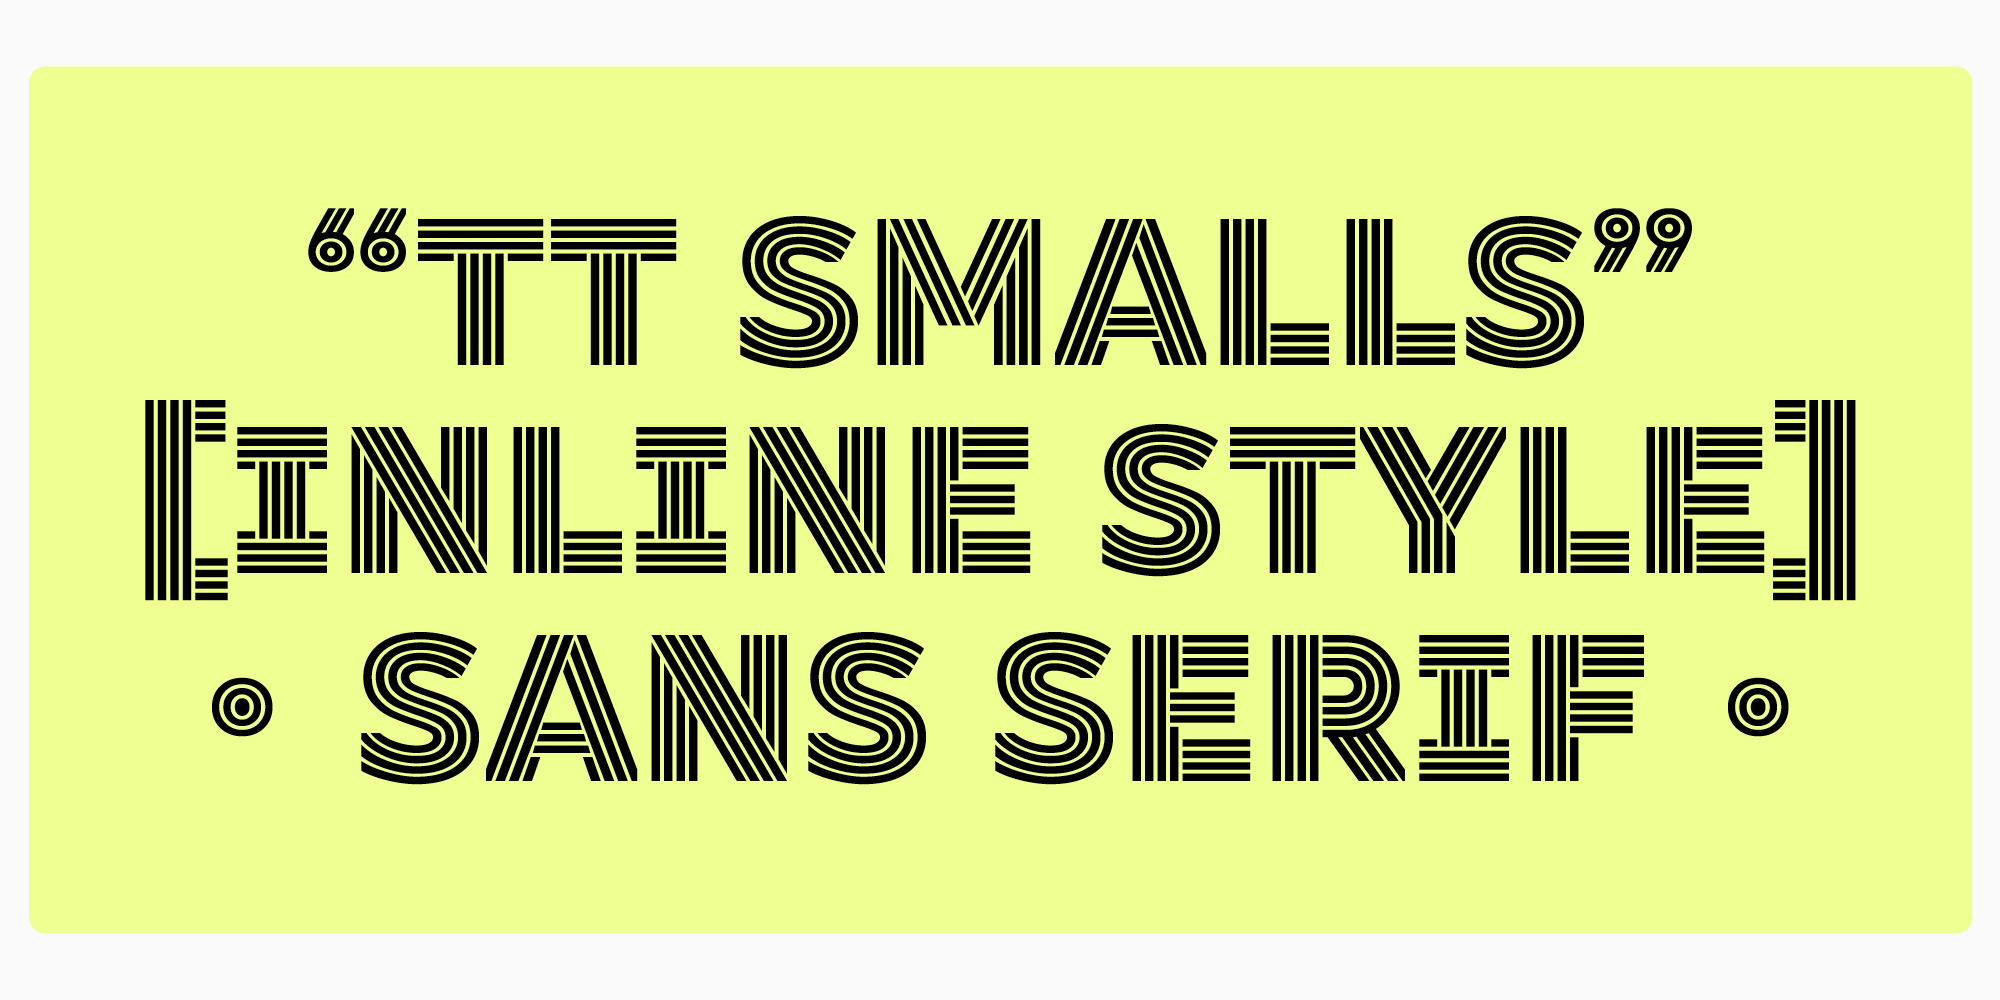 At First Sight: Stylish Fonts for Headlines and Displays